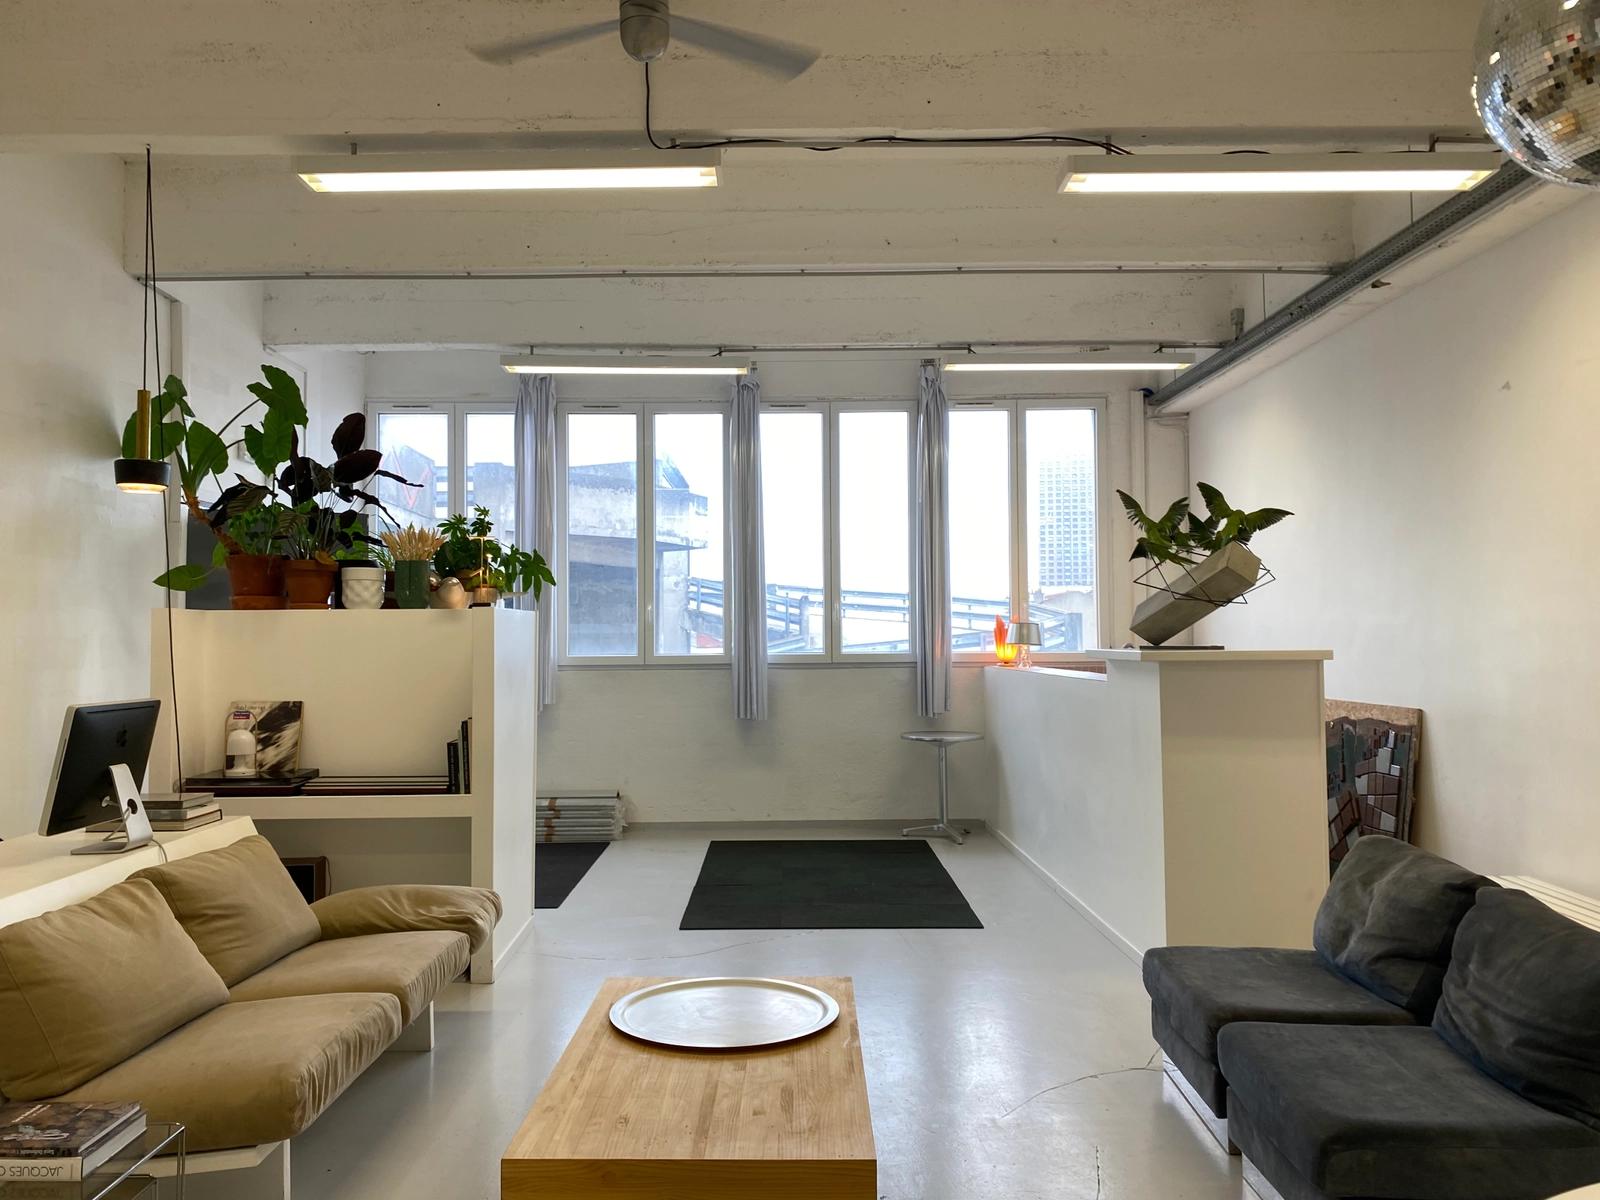 Living room in Hyperurban architecture studio loft with view - 0